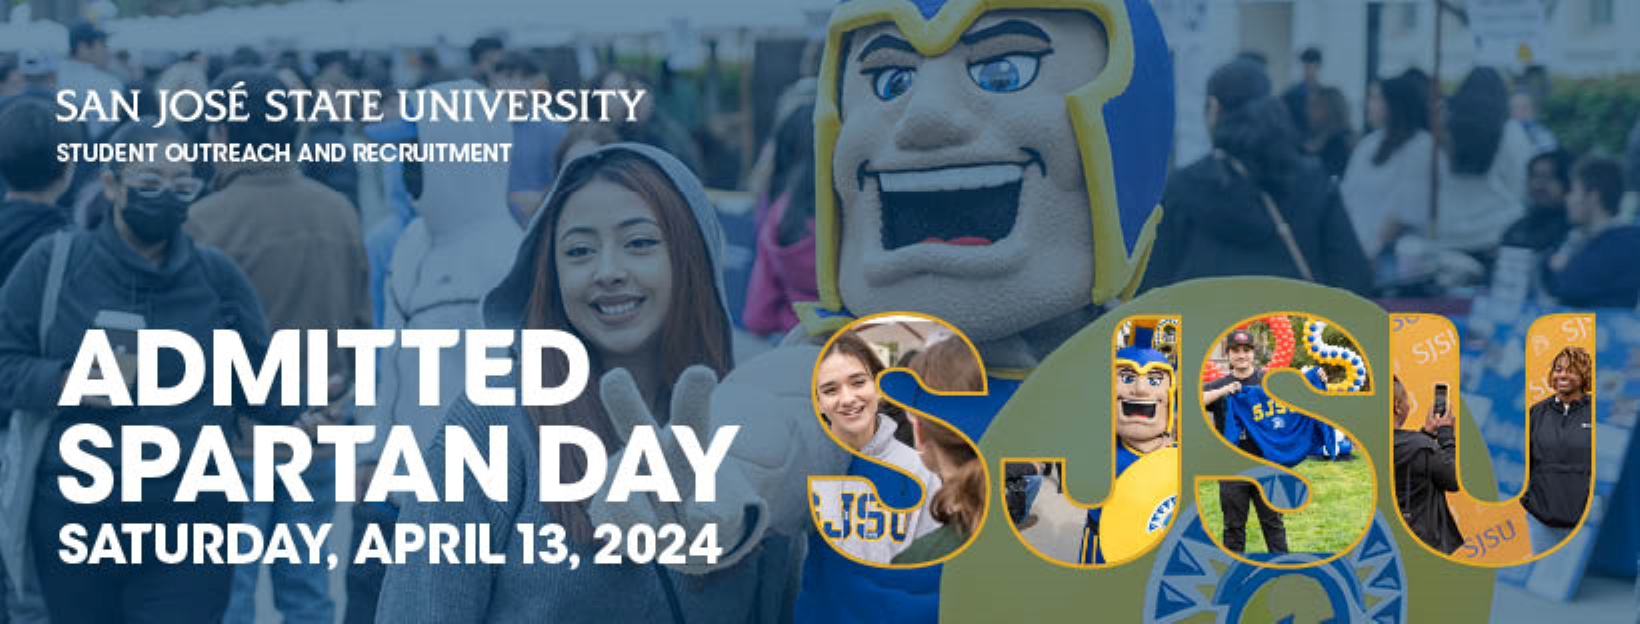 Admitted Spartan Day Banner featuring event day of Saturday, April 13, 2024